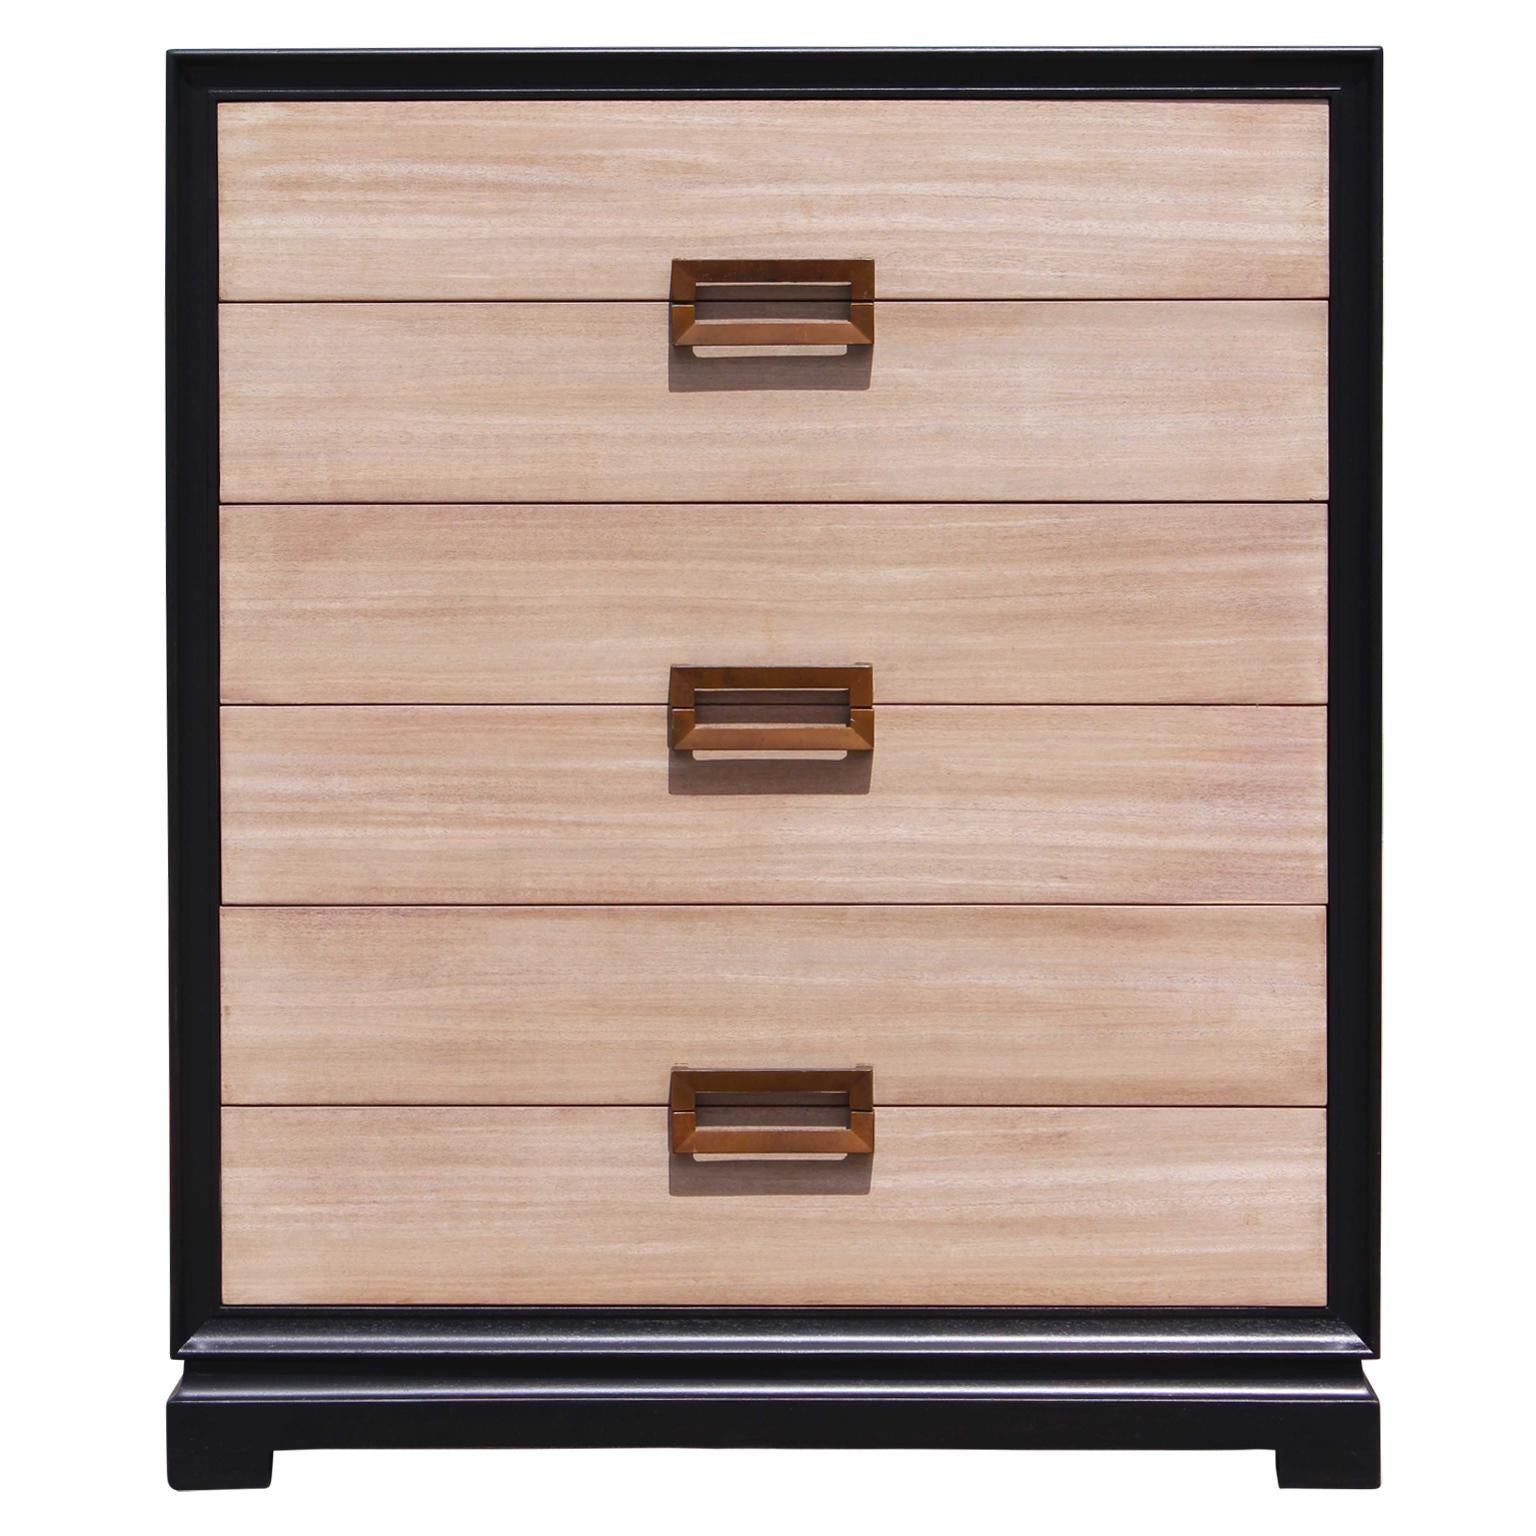 Modern Two-Tone Six-Drawer Chest of Drawers with a Neutral Finish & Brass Pulls